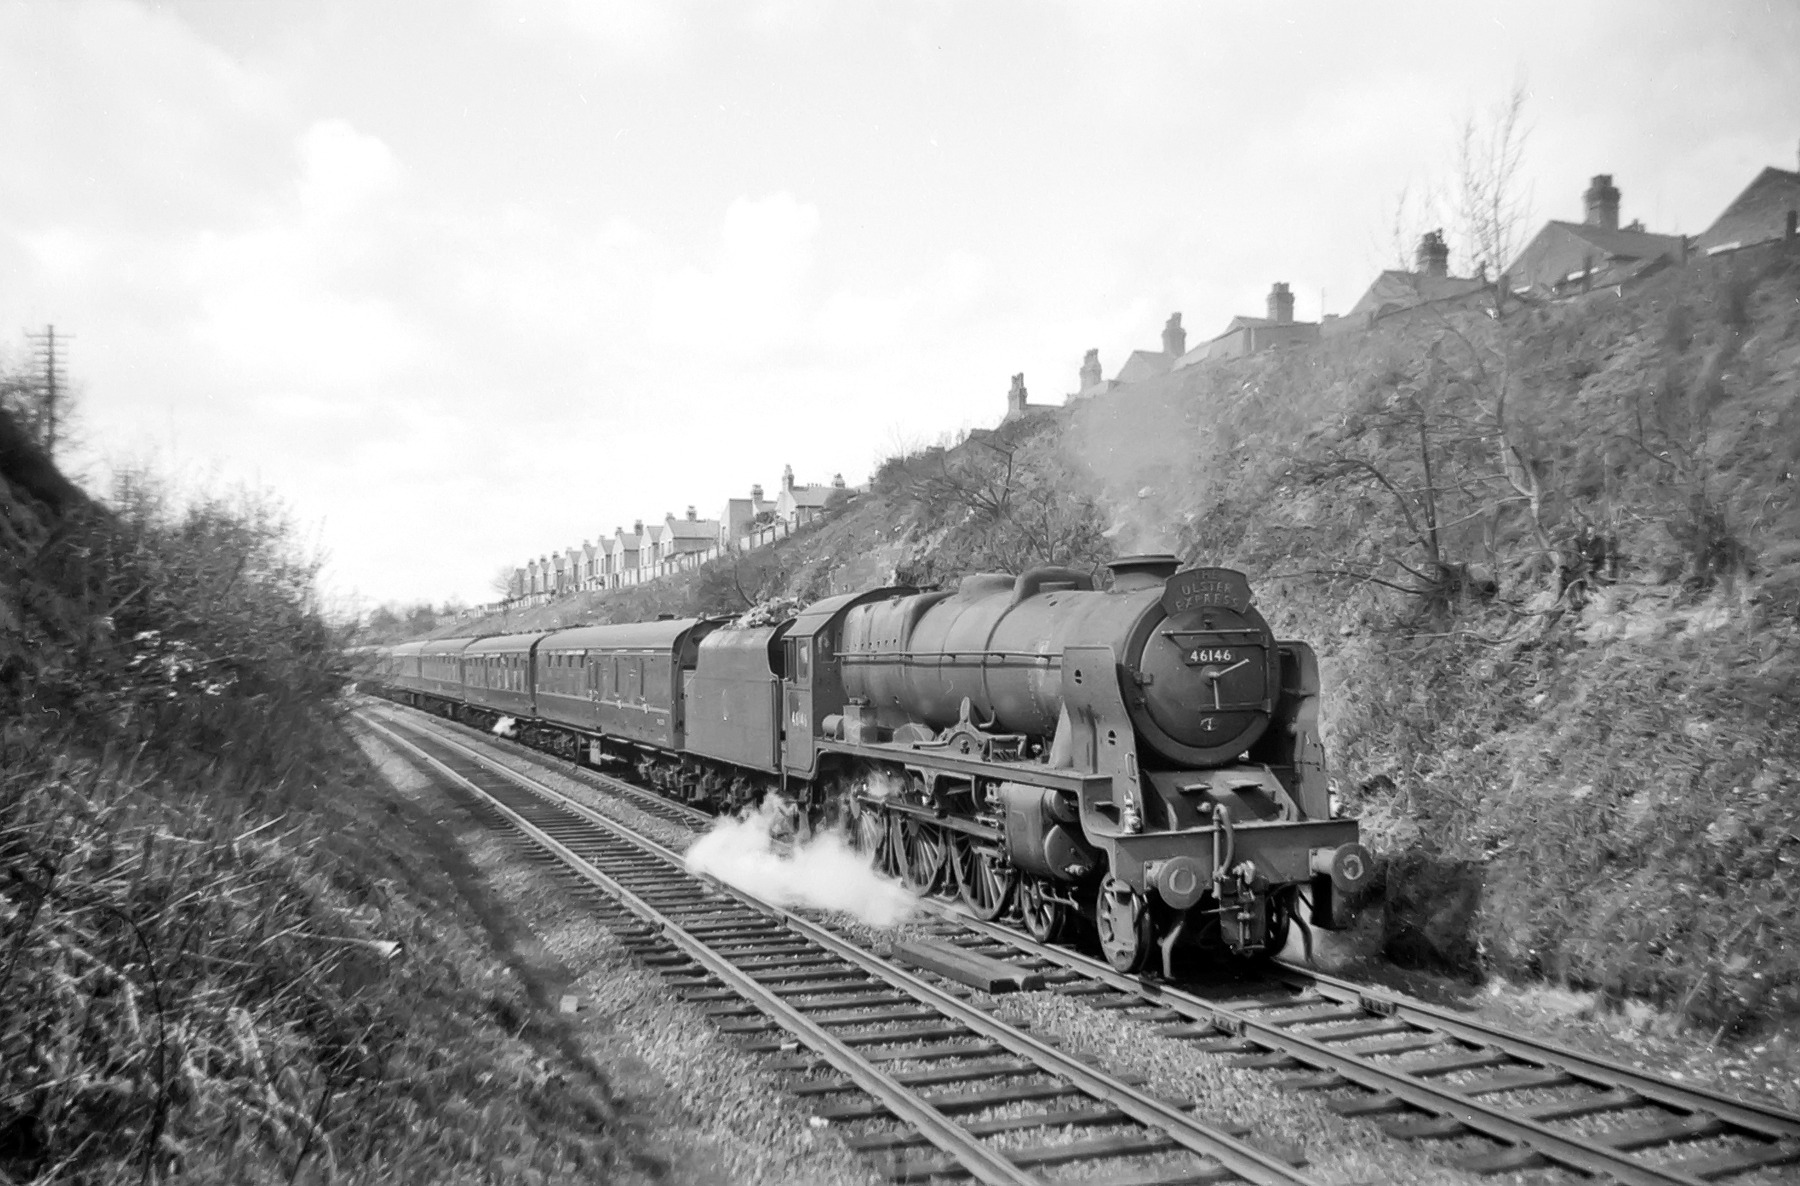 Royal Scot No.46146 'The Rifle Brigade' has stopped near the Earlsdon Avenue bridge for a temporary restriction as it works the diverted 'The Ulster Express' through Coventry. Houses in the background are in Highland Road. c1959.